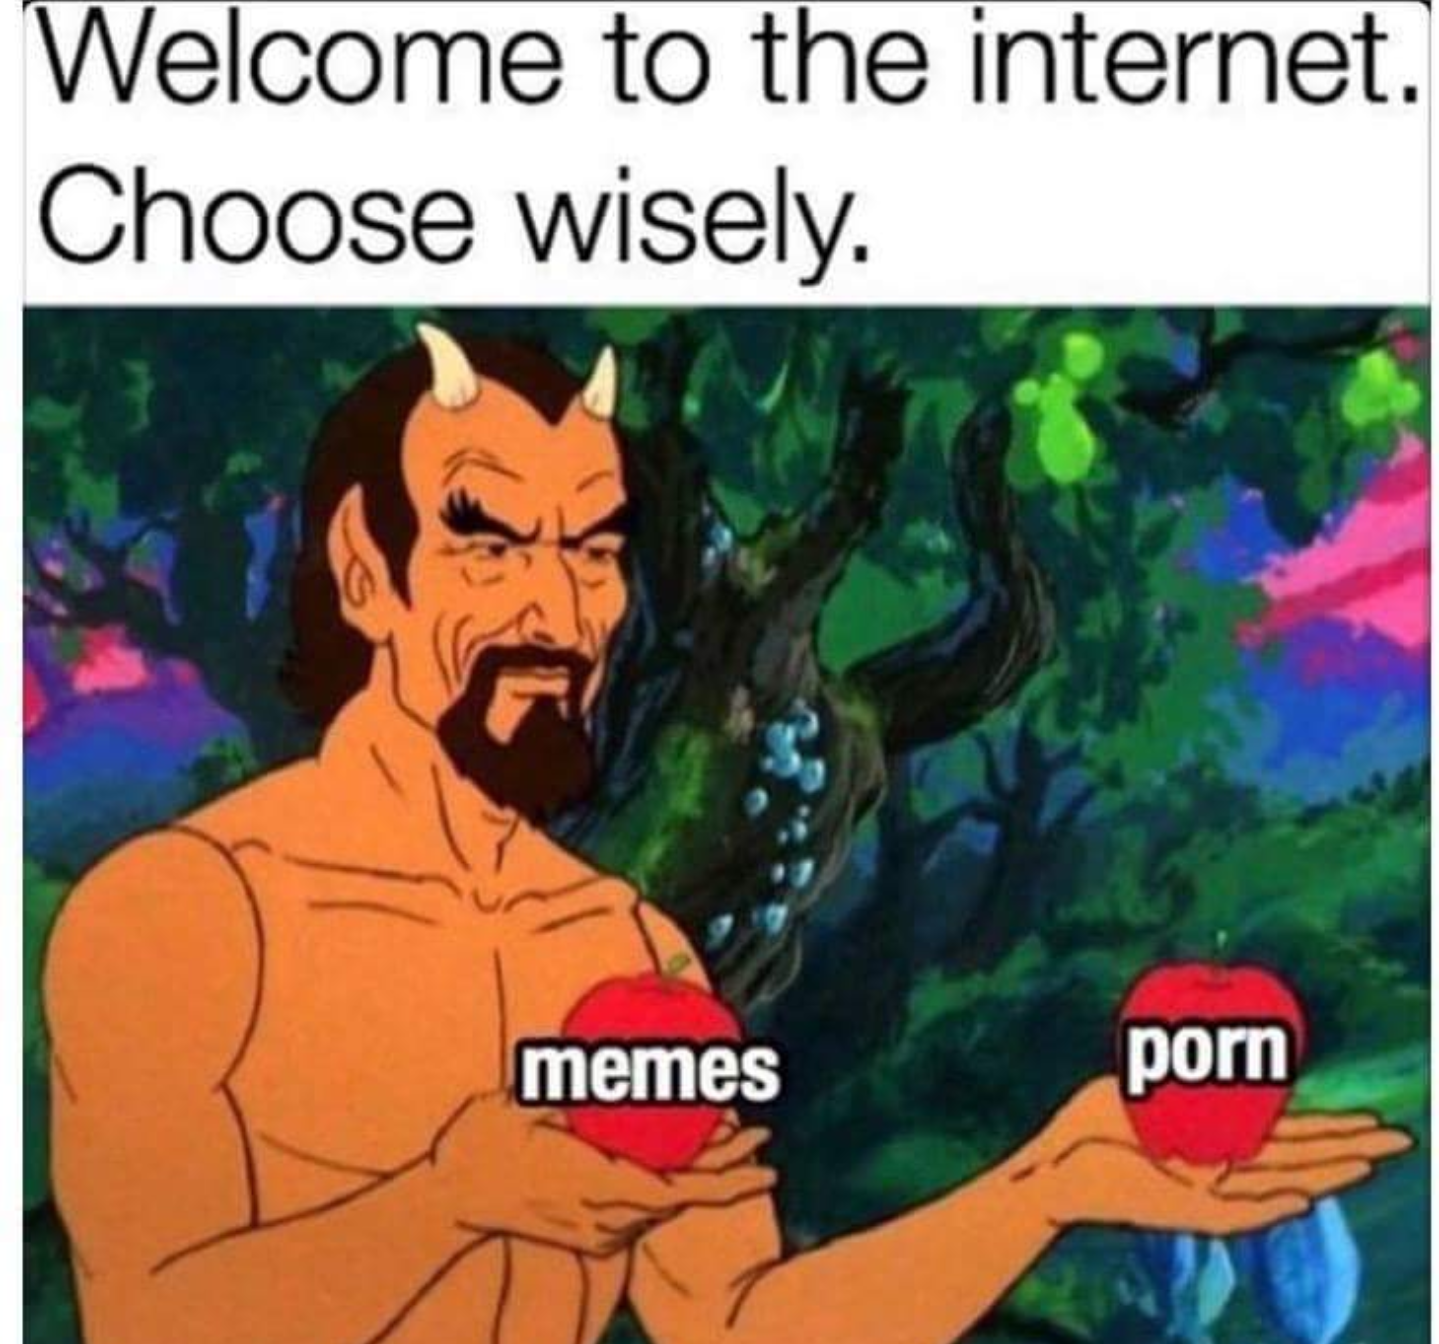 porn memes - Welcome to the internet. Choose wisely. memes porn